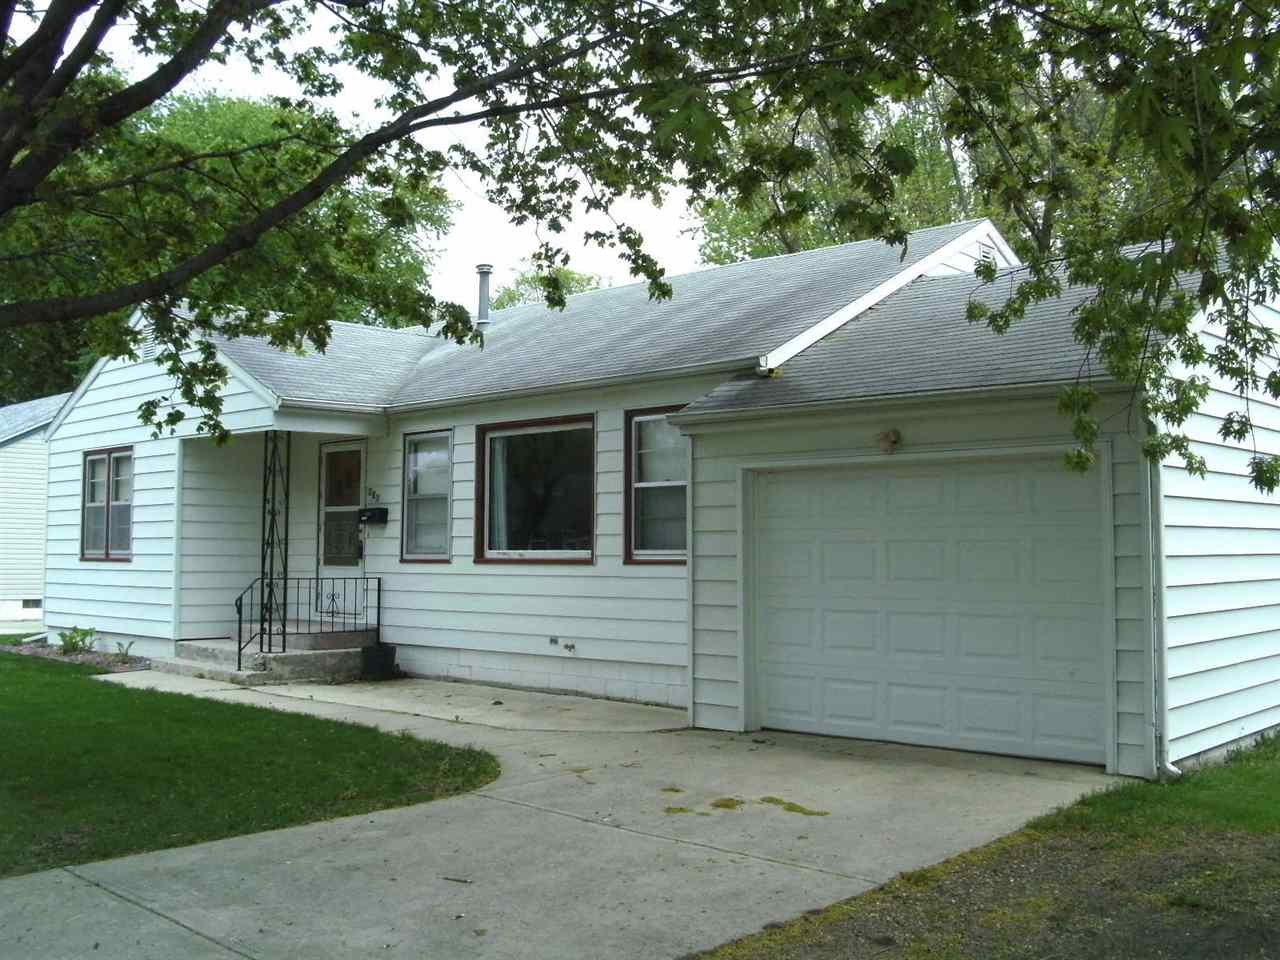 808 N 13th St, Estherville, IA 51334 